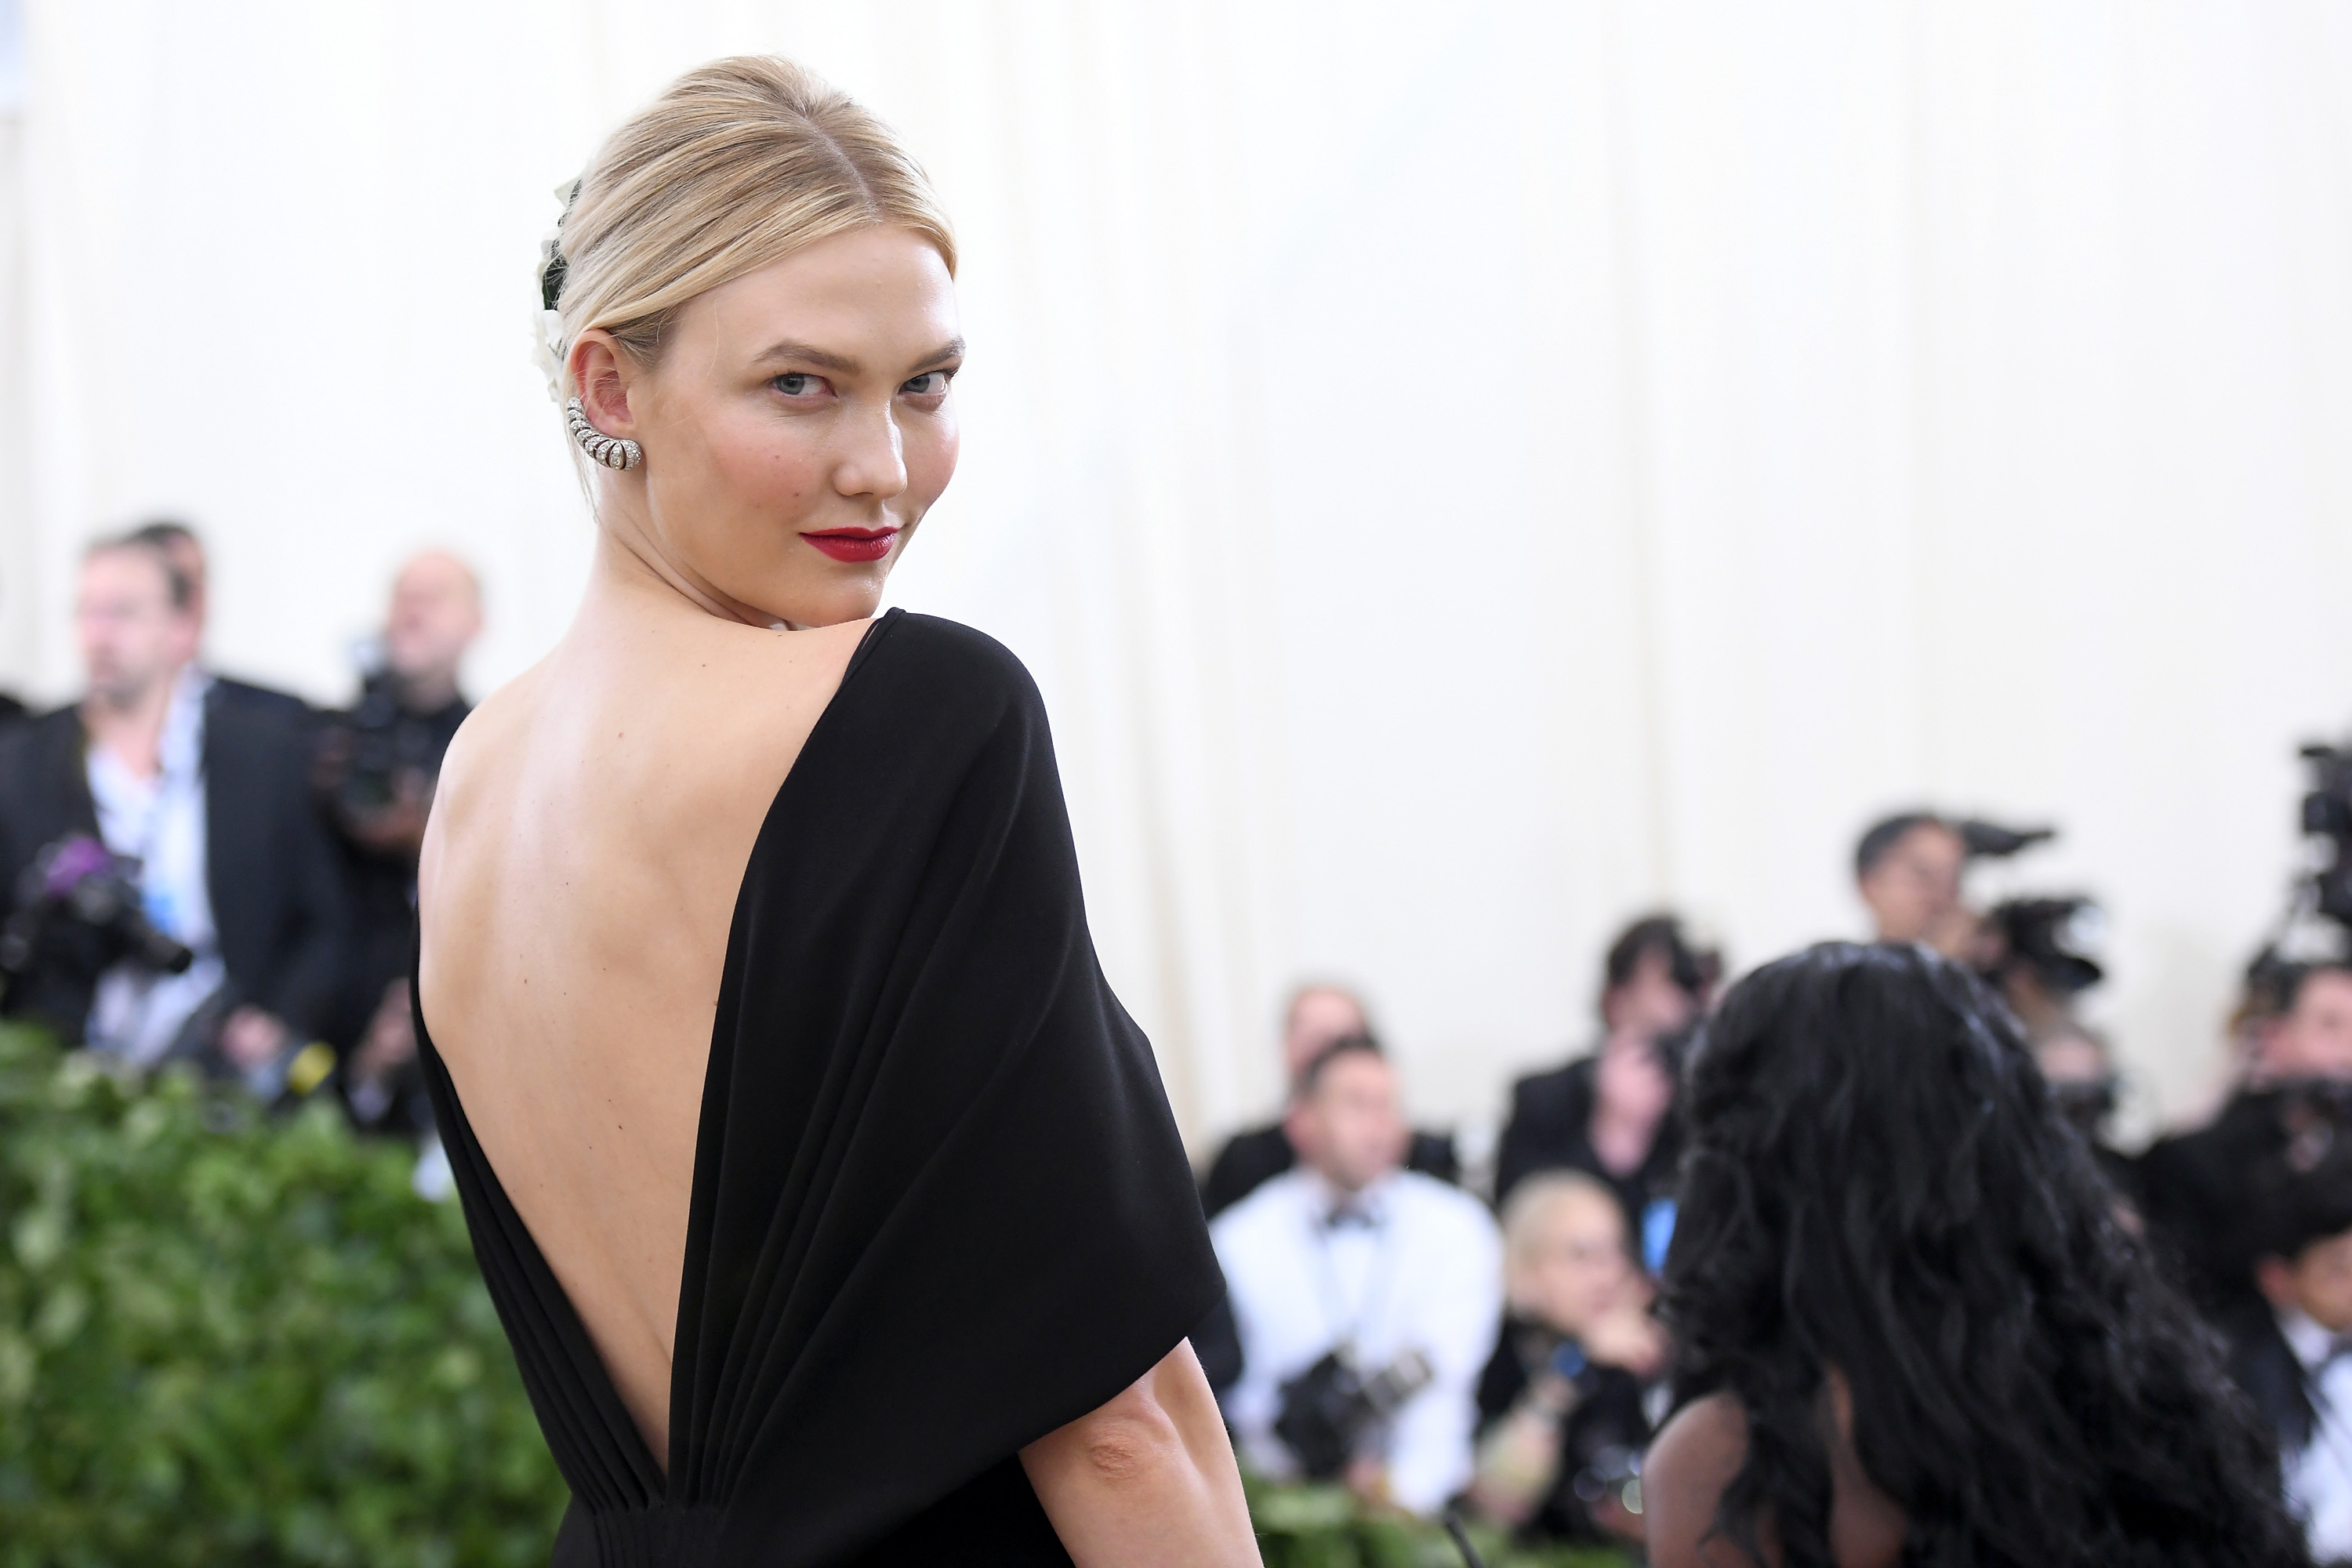 NEW YORK, NY - MAY 07:  Model Karlie Kloss attends the Heavenly Bodies: Fashion & The Catholic Imagination Costume Institute Gala at The Metropolitan Museum of Art on May 7, 2018 in New York City.  (Photo by Noam Galai/Getty Images for New York Magazine)